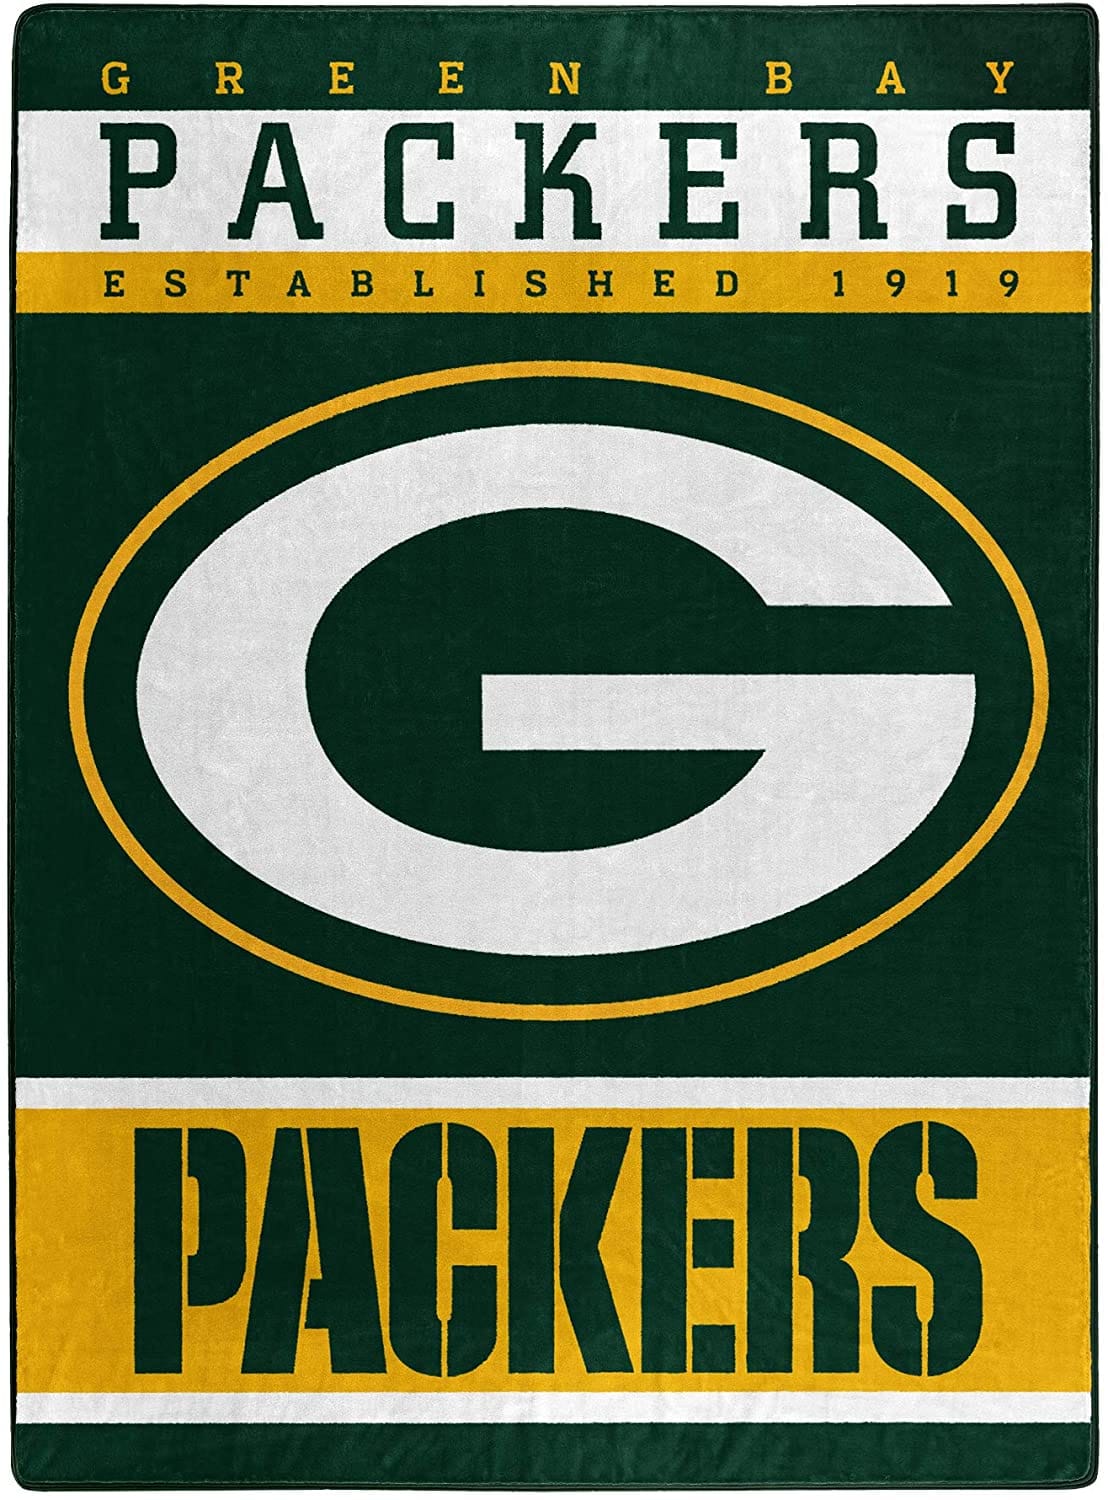 The Officially Licensed Nfl Throw Green Bay Packers Fleece Blanket